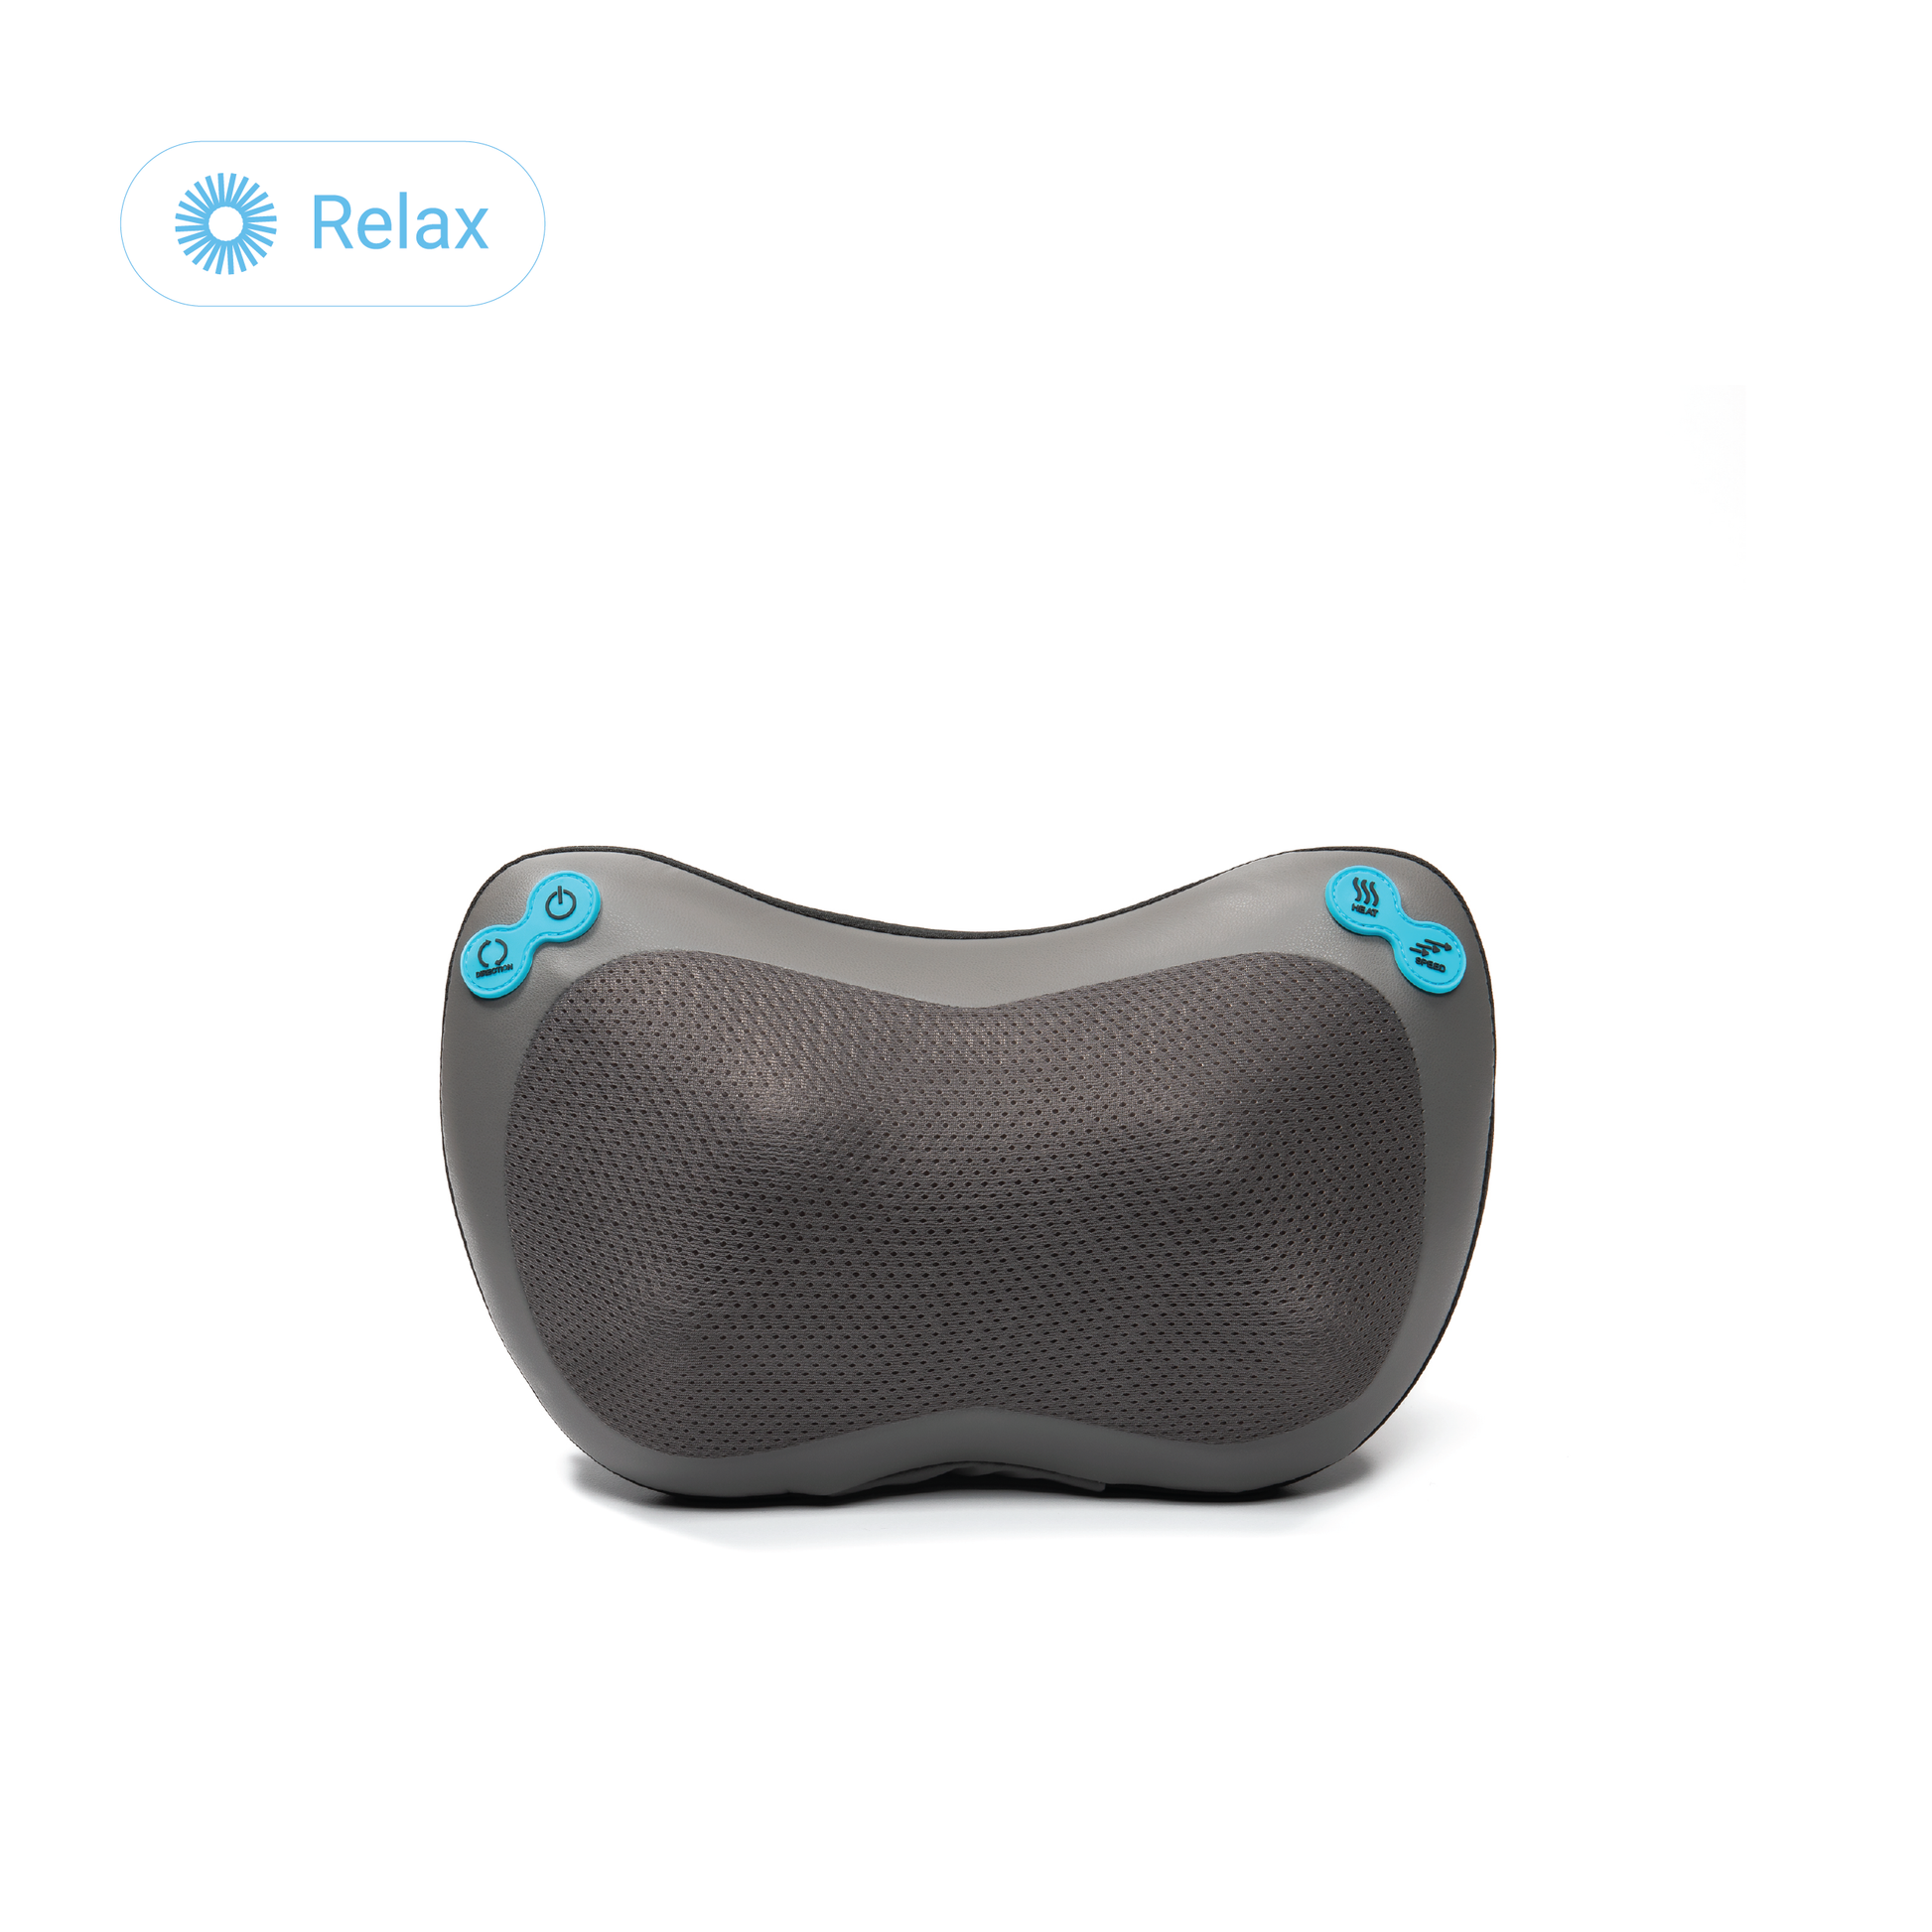 Njoie Ripple Vibrating Heated Chair Massager